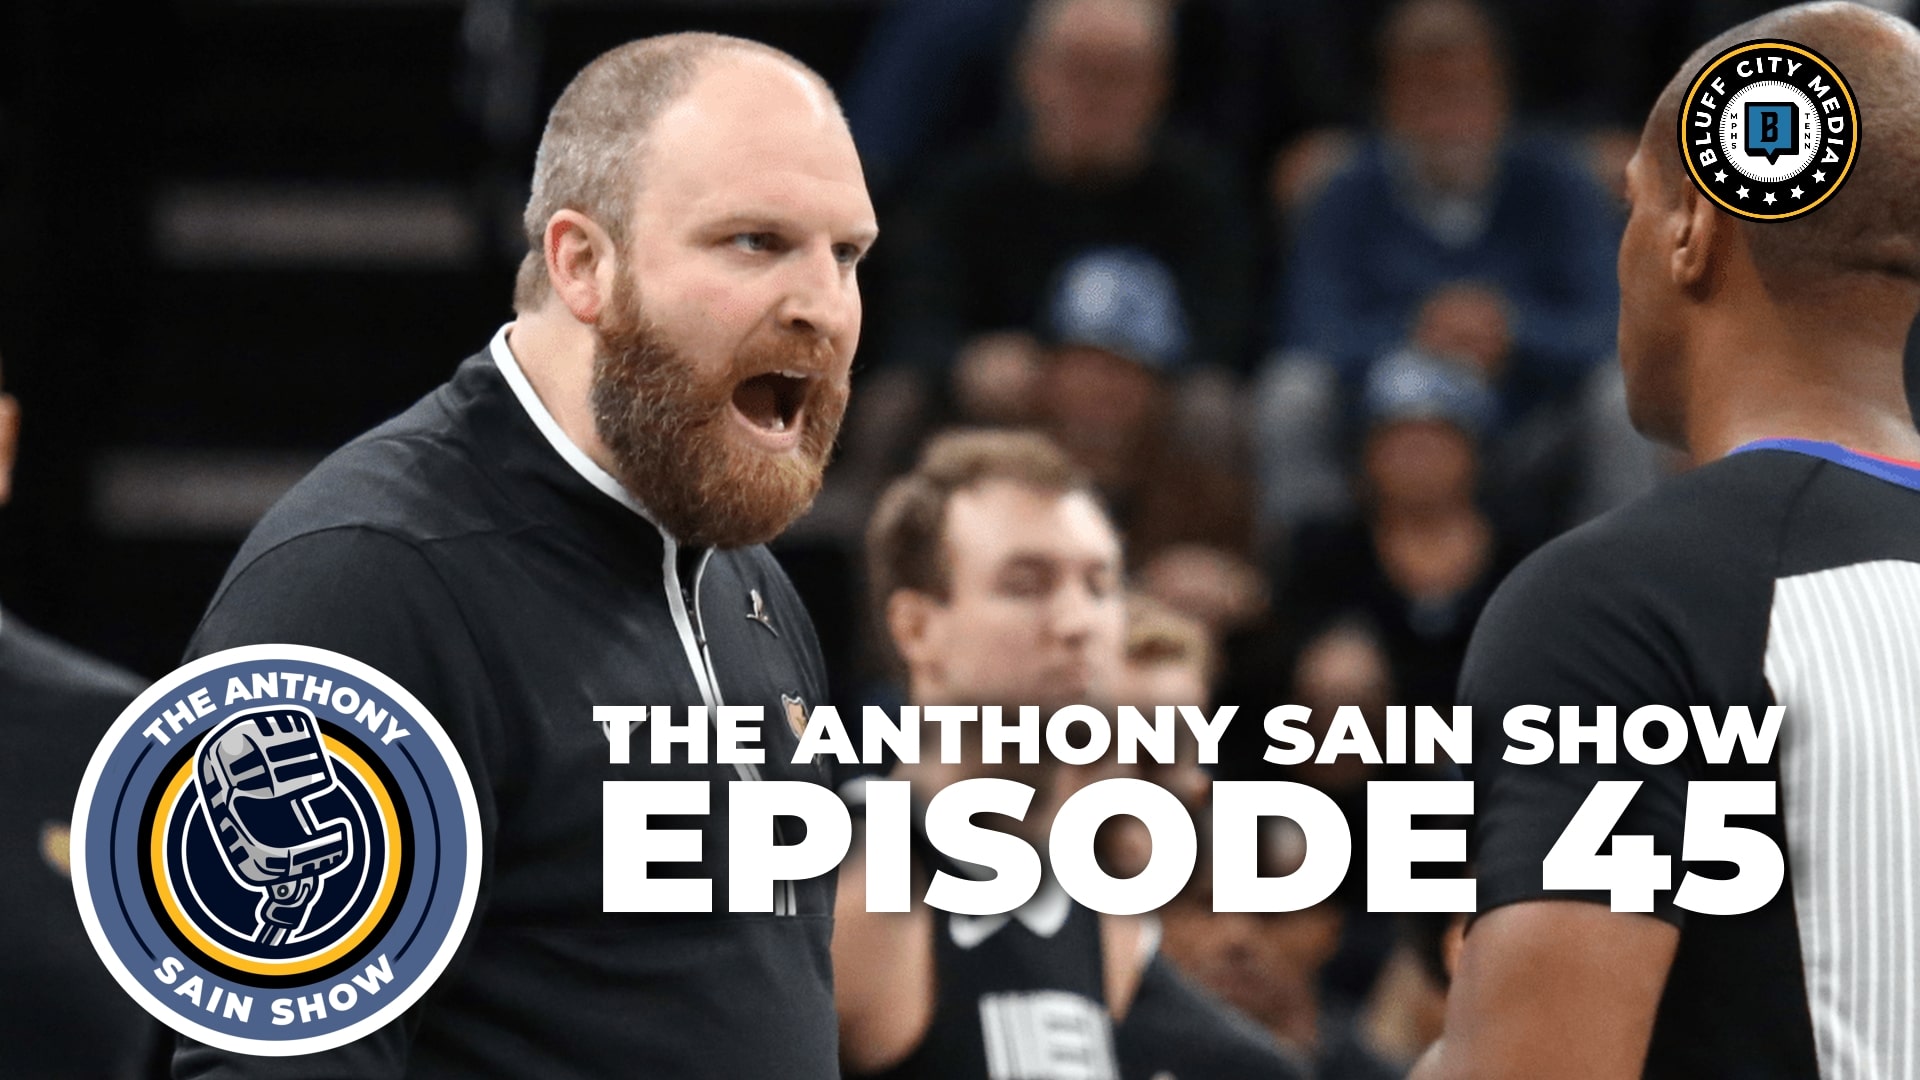 Featured image for “The Anthony Sain Show Ep 45: Grizzlies Are Running Out of Excuses; Jacob Gilyard’s Play”